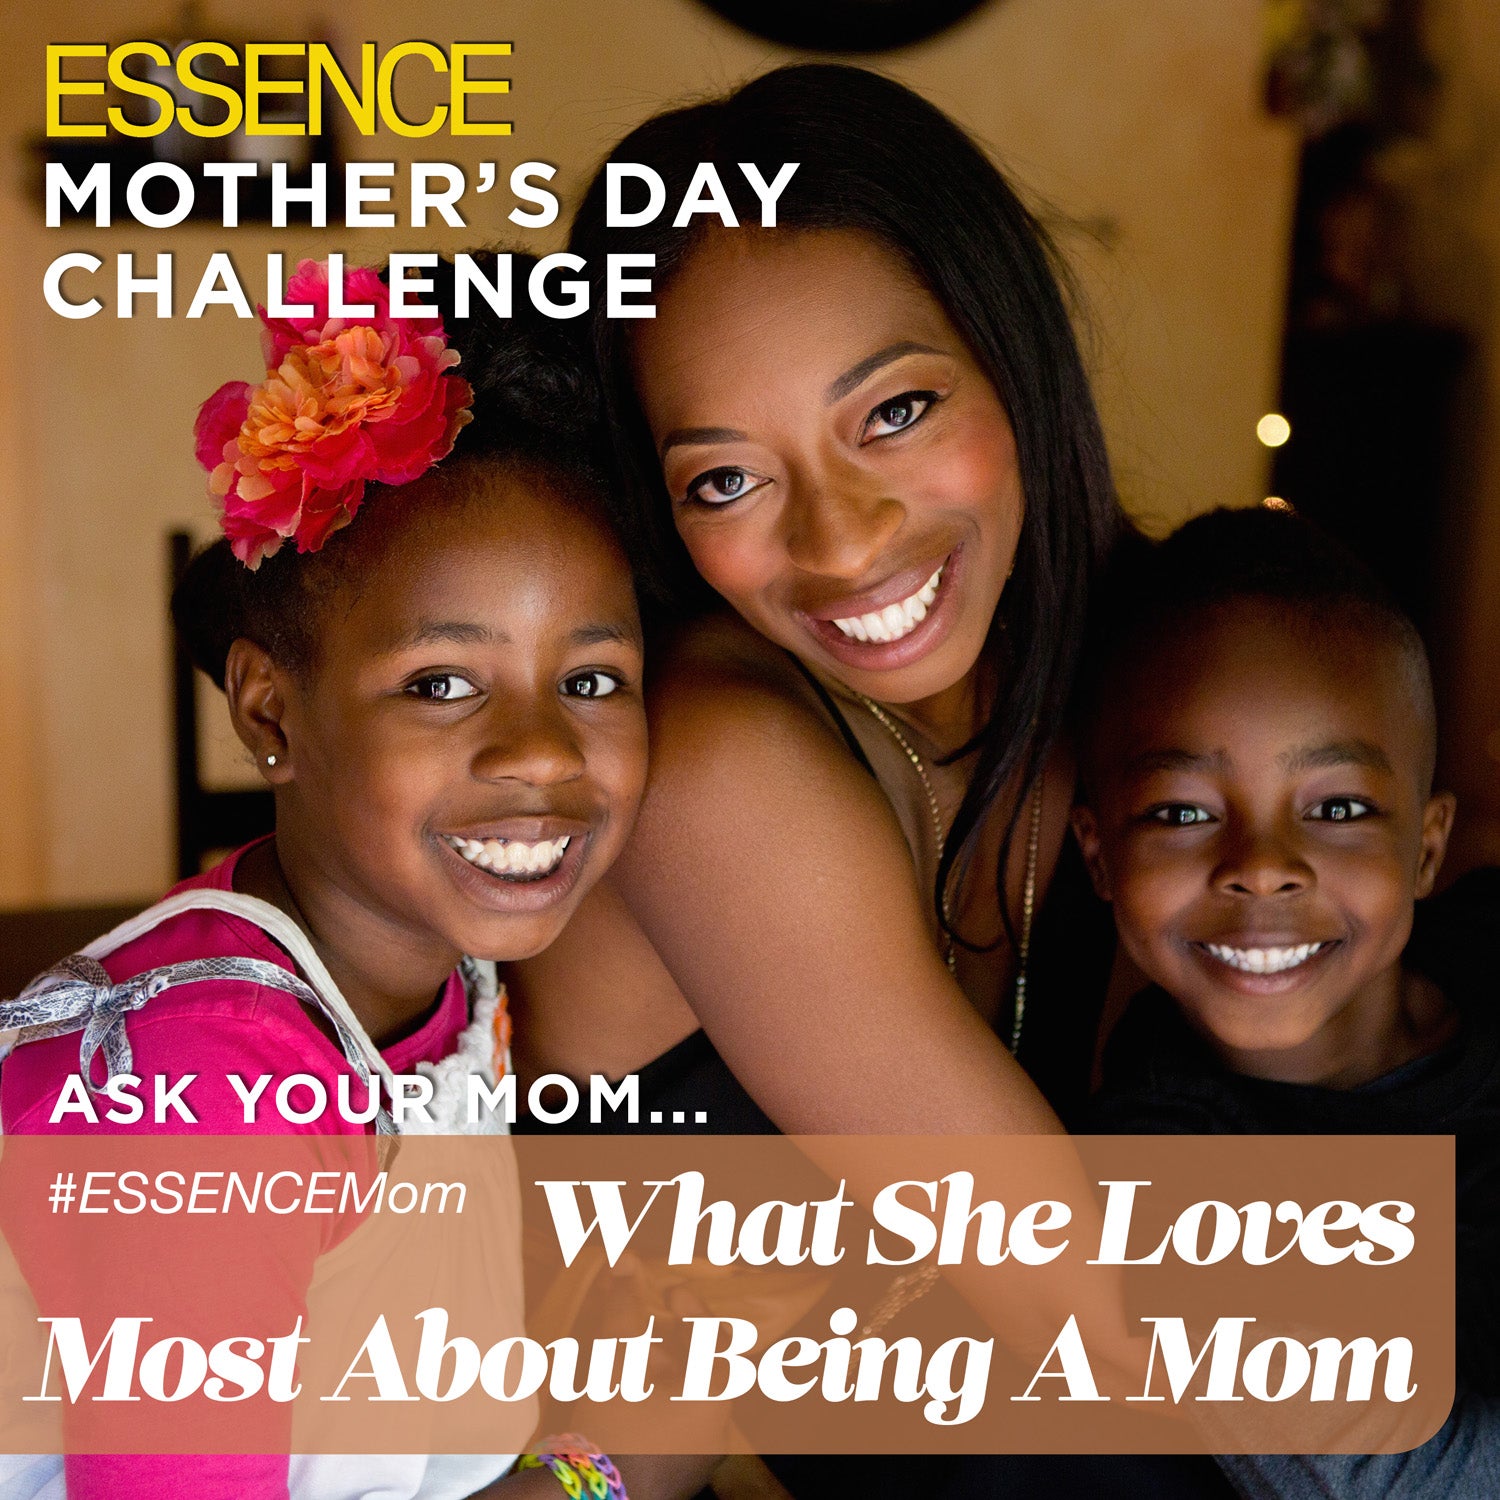 ESSENCE's Mother's Day Challenge